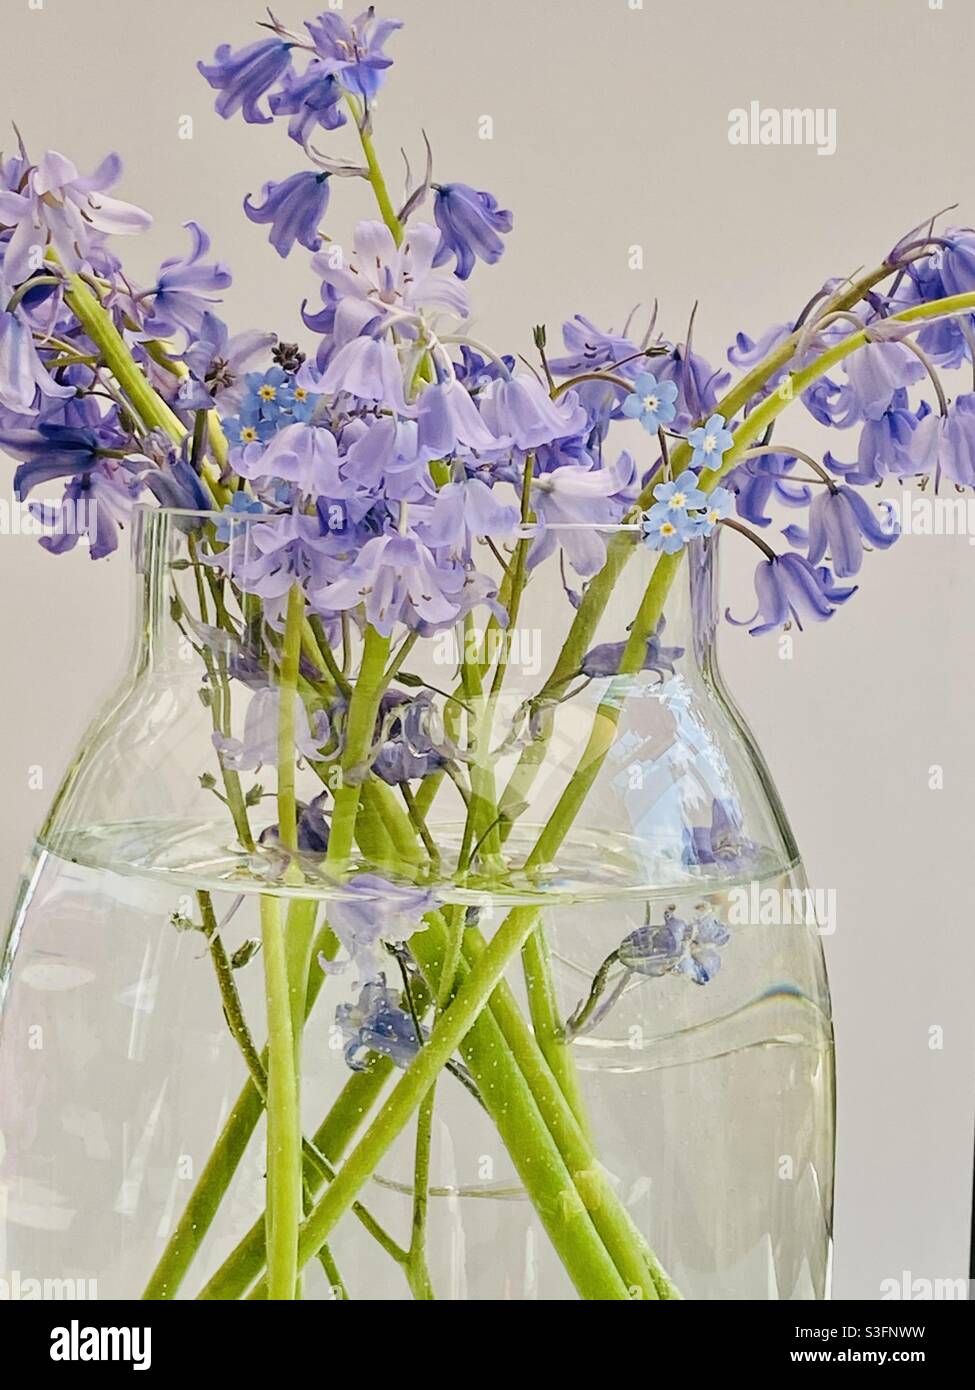 Bluebells and Forget-me-nots in a vase ? Stock Photo